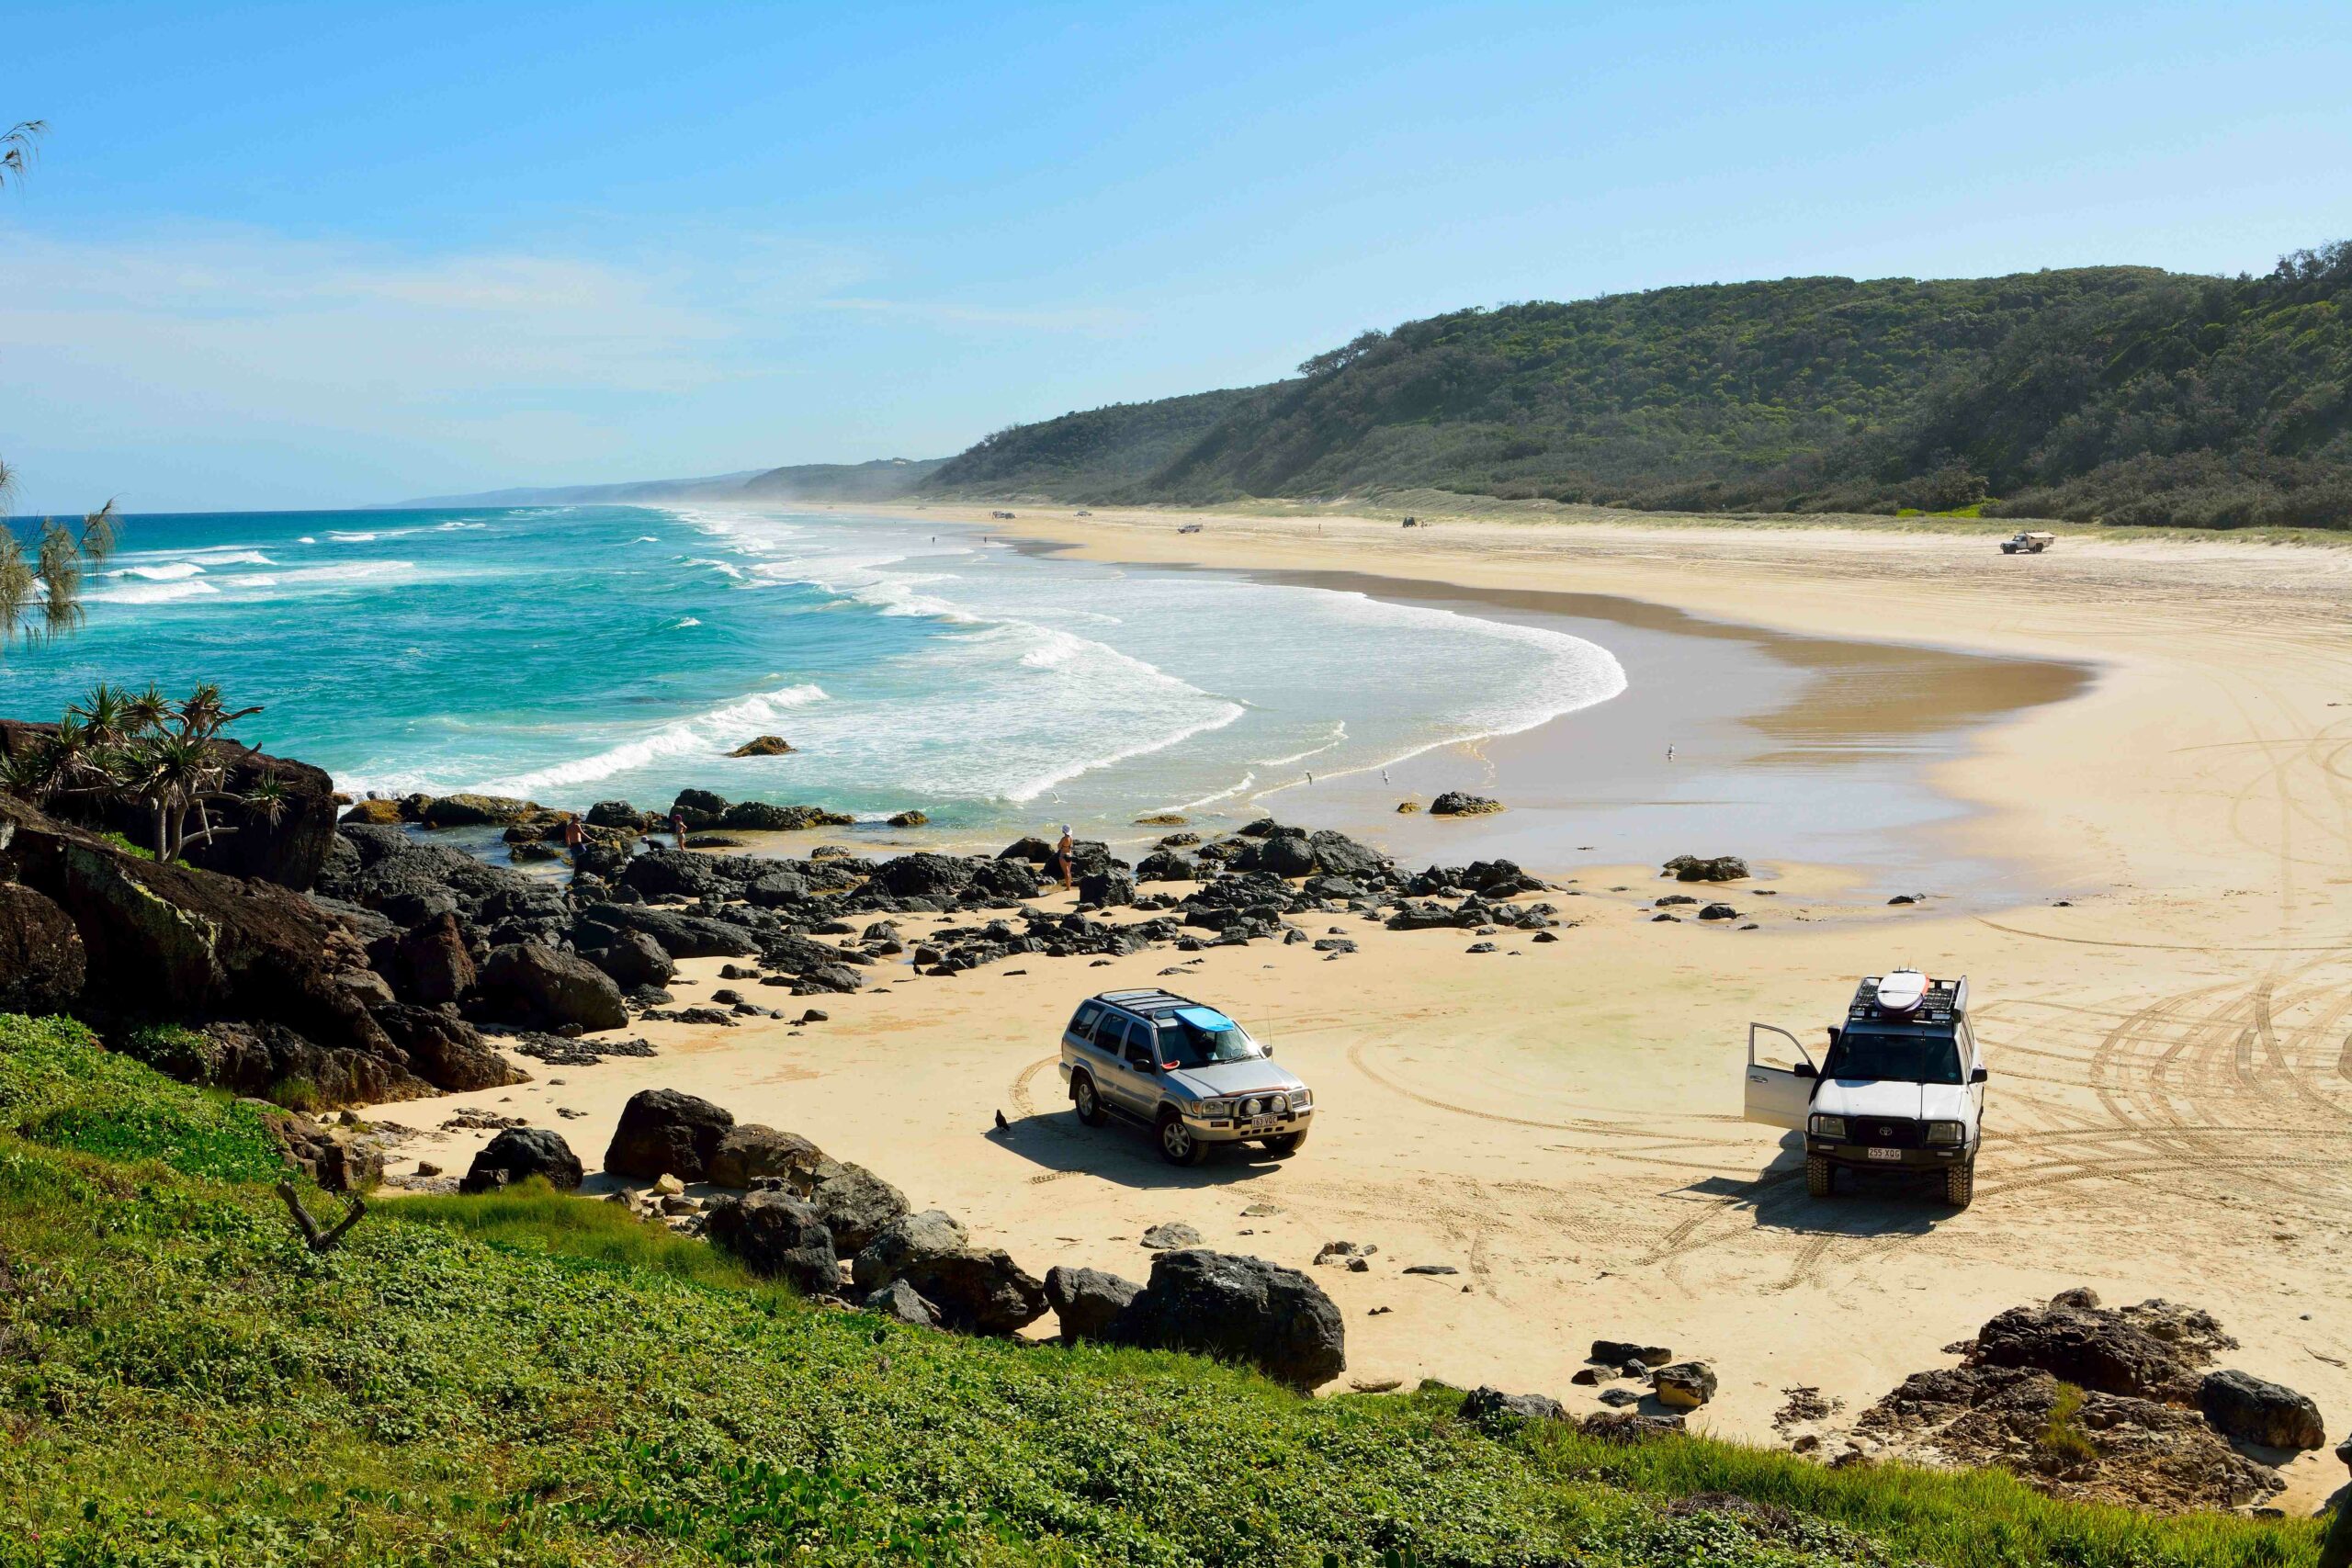 Will you buy a car when you finally get to fly to the Gold Coast for a holiday?